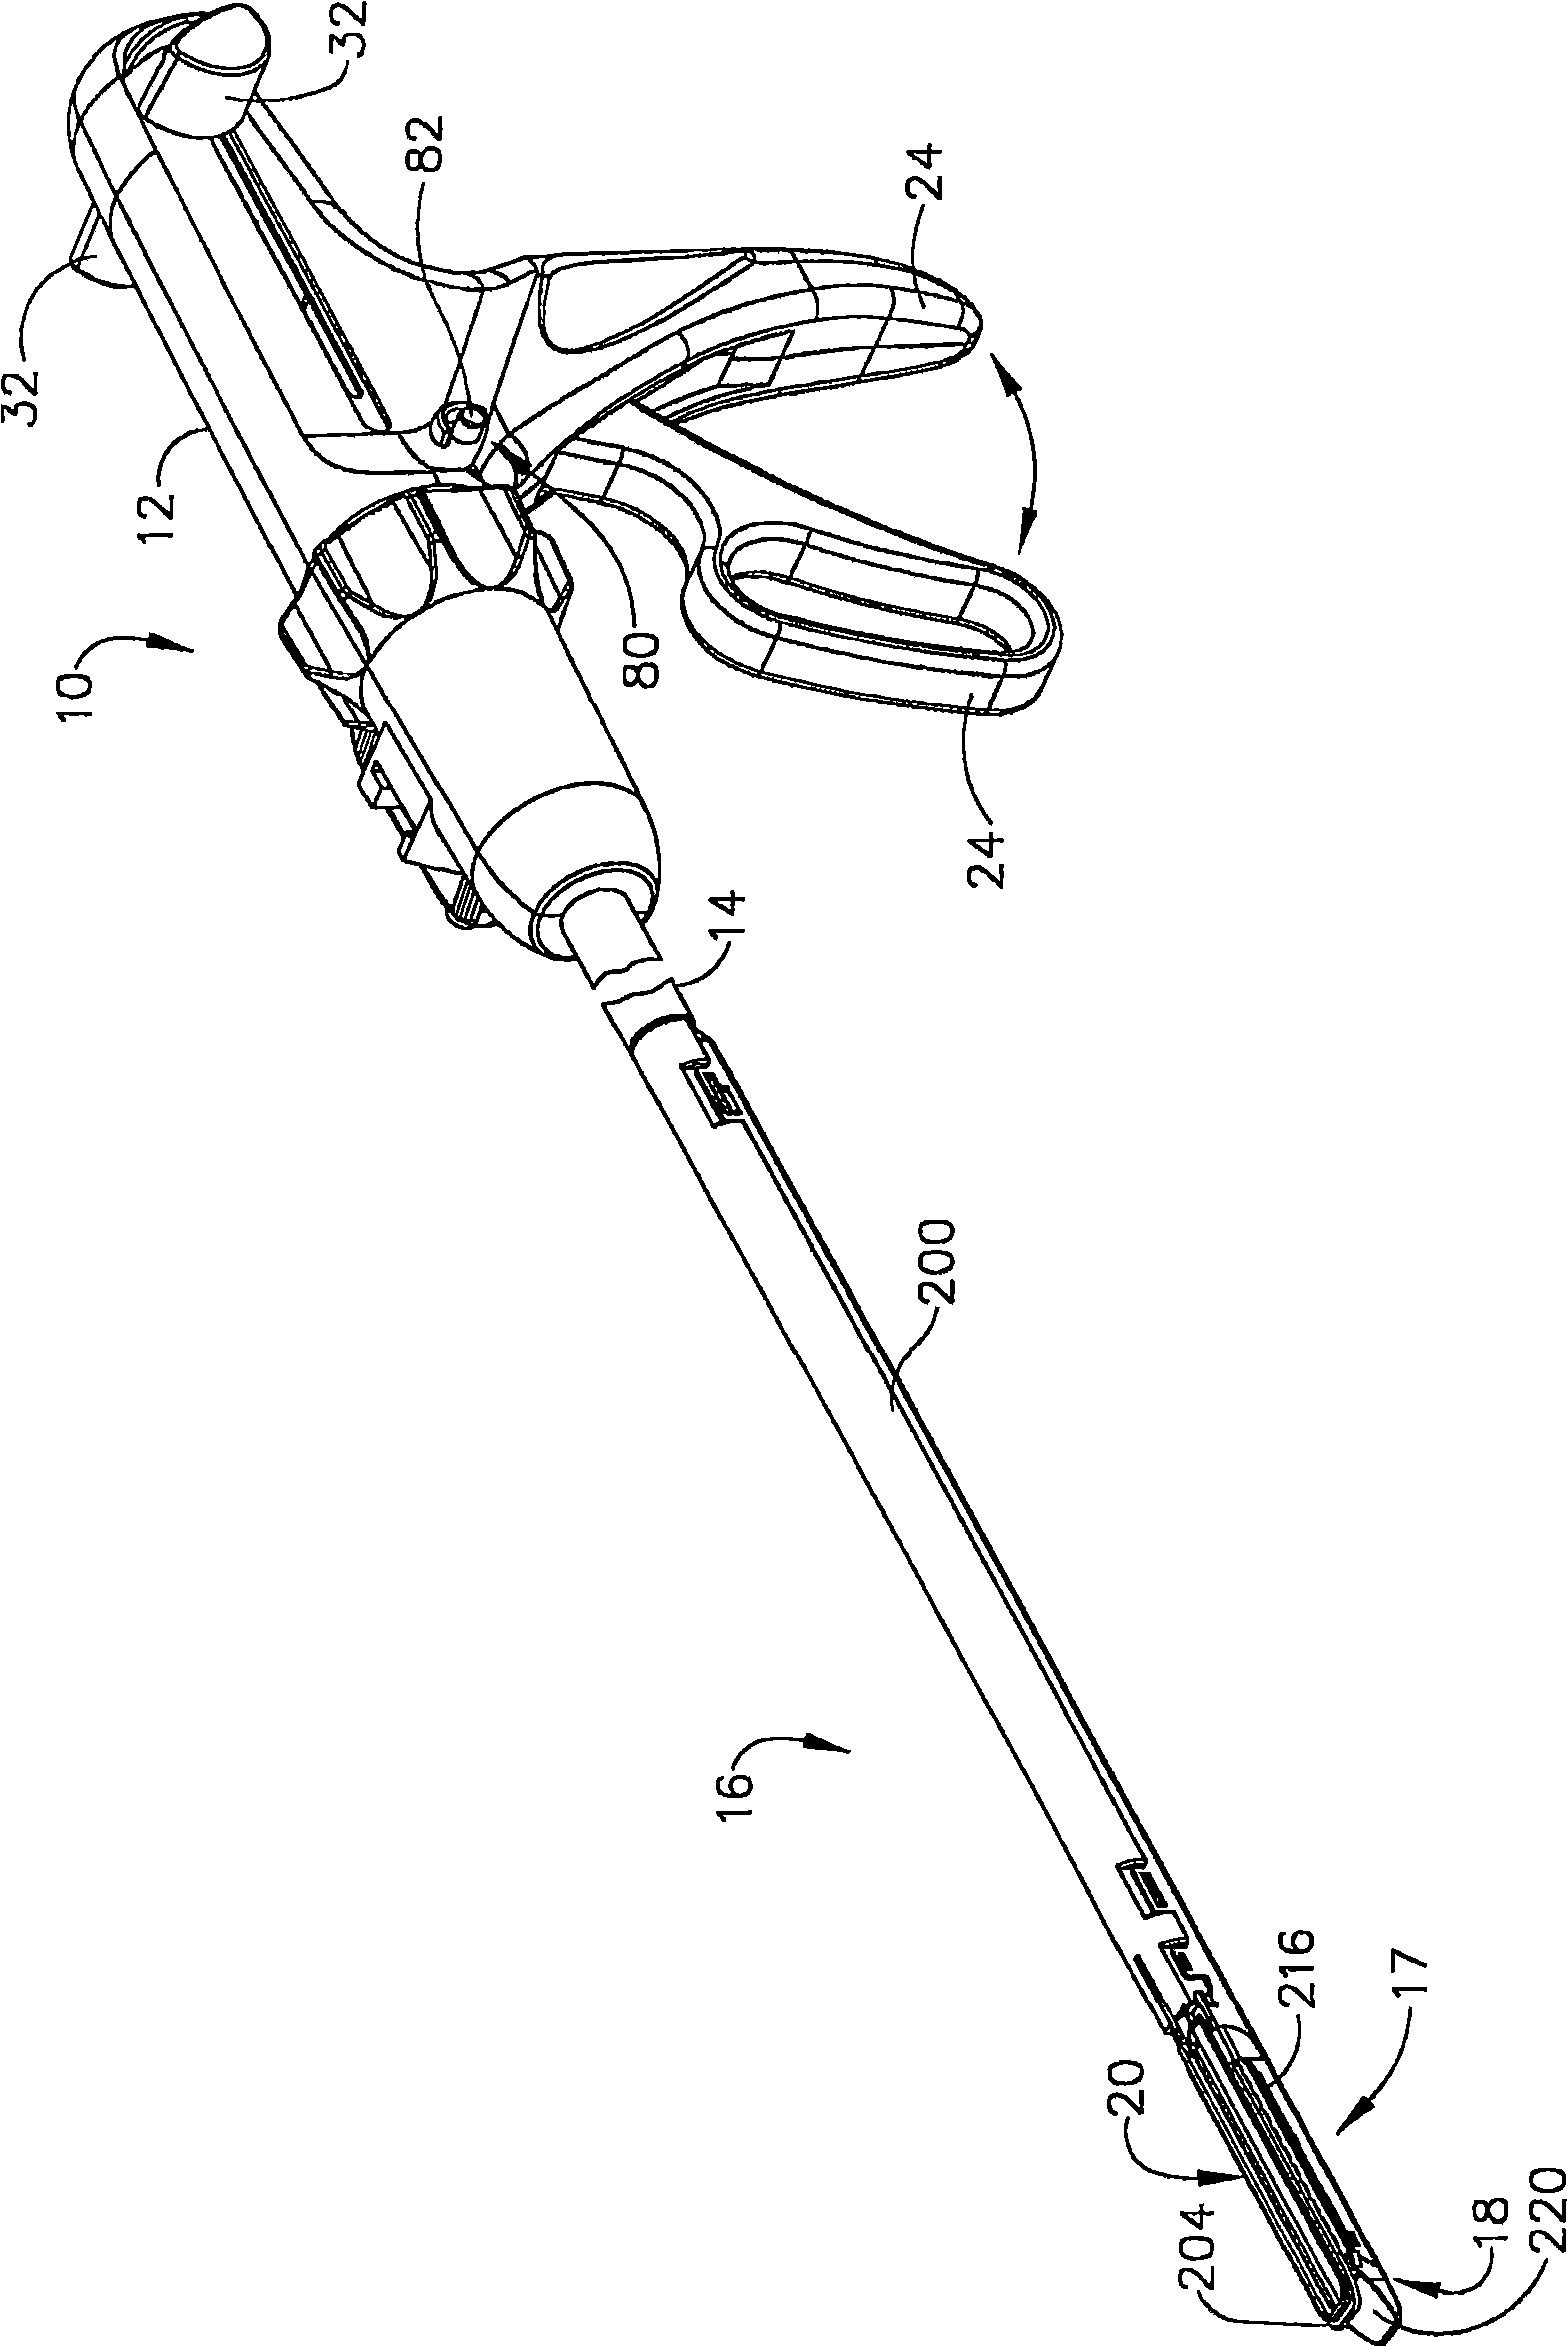 Disposable motor-driven loading unit for use with a surgical cutting and stapling apparatus